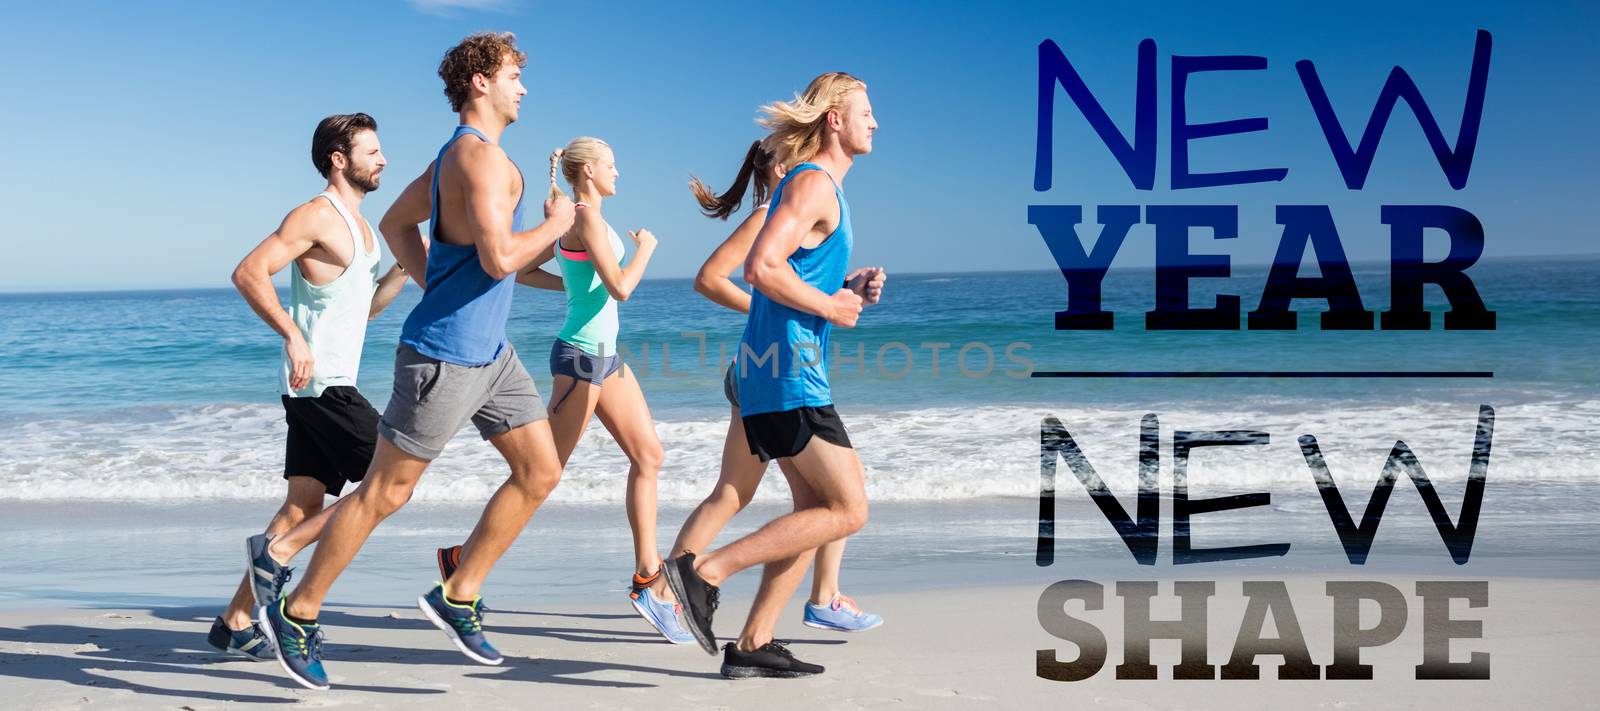 New year new shape against people jogging on beach